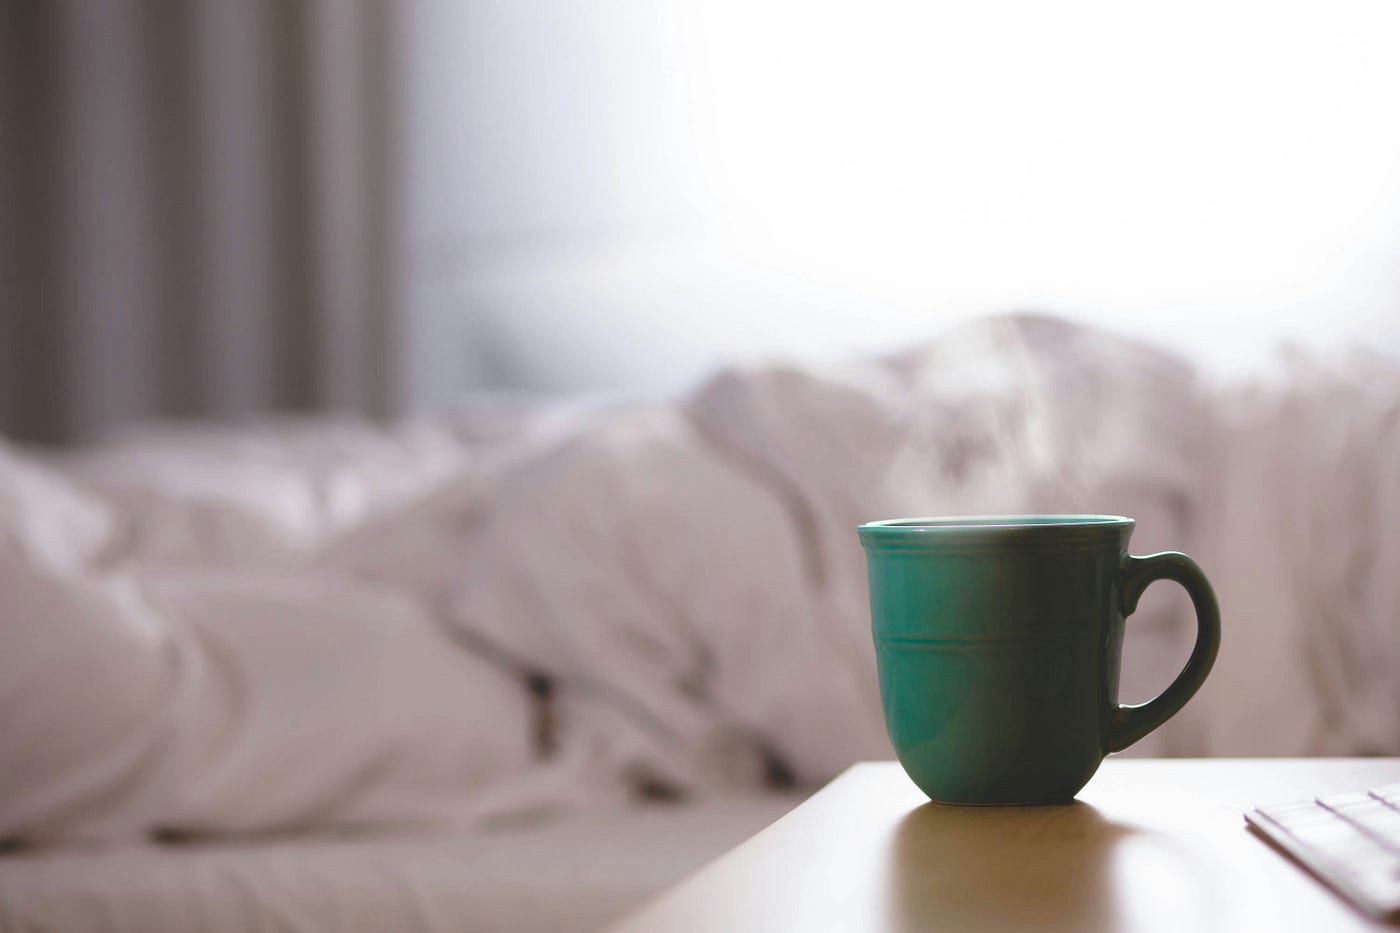 A steaming green coffee cup sits on a desk, with a a bed and a white comforter in the background.